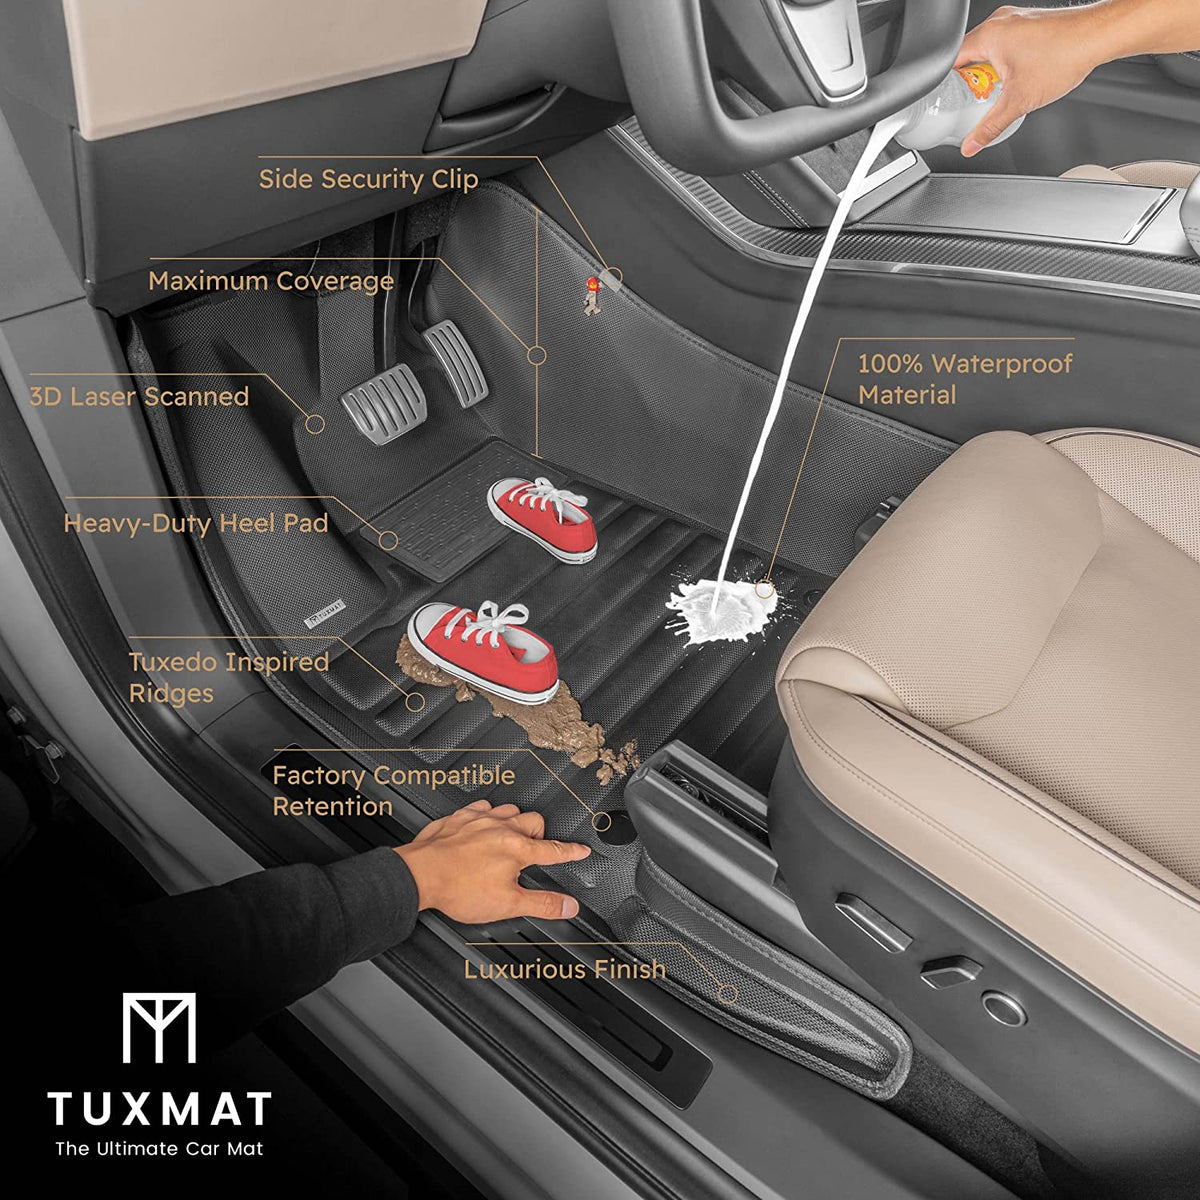 TuxMat 8525  - for Hyundai Sonata 2020-2023 Models - Custom Car Mats - Maximum Coverage, All Weather, Laser Measured - This Full Set Includes 1st and 2nd Rows